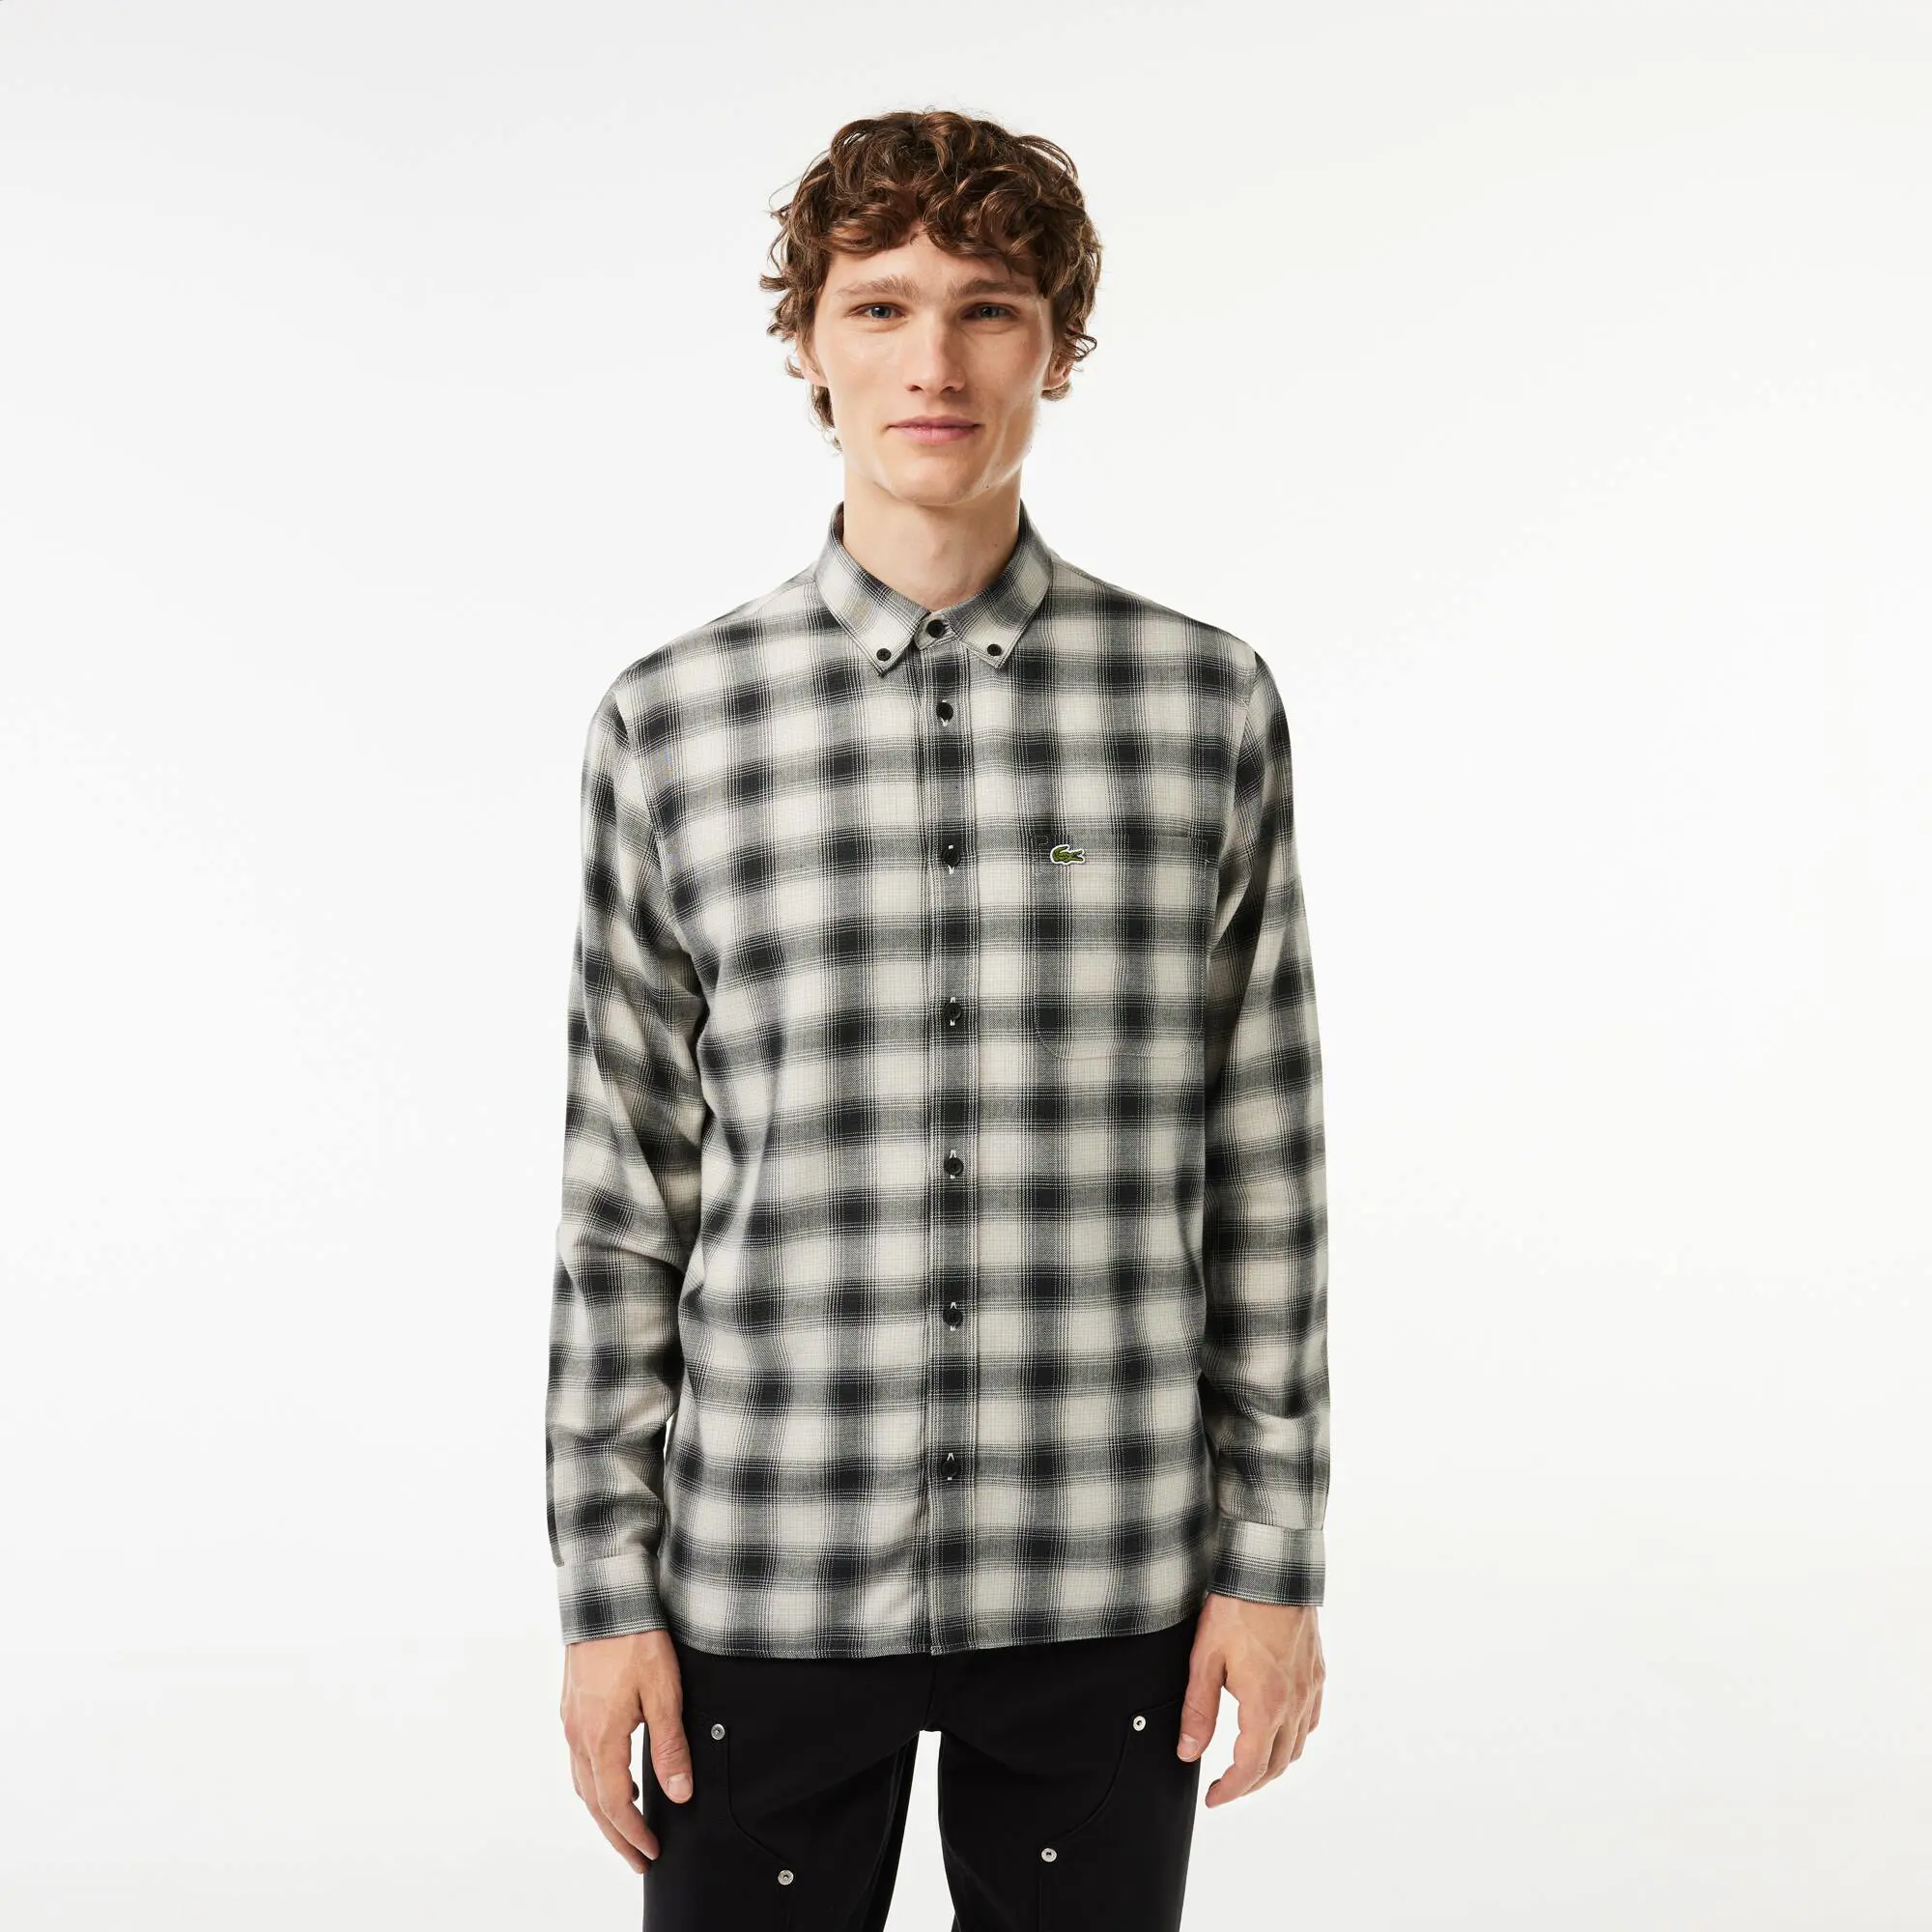 Lacoste Men's Cotton and Wool Blend Checked Flannel Shirt. 1